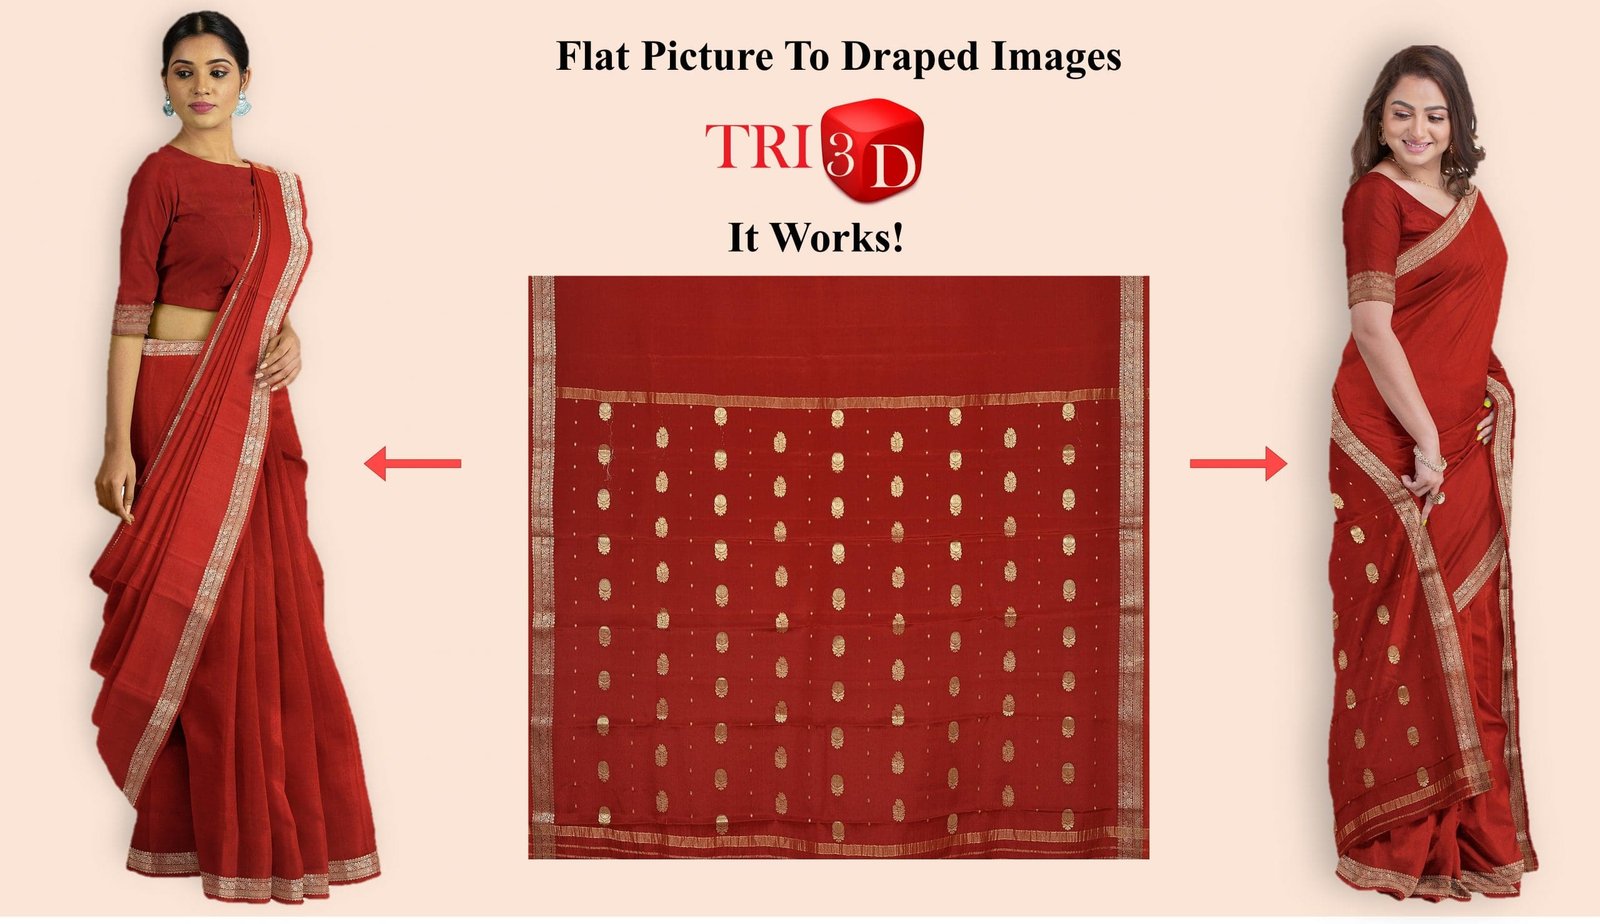 IIT Madras Incubated Startup TRI3D brings Next-Gen 3D Tech to Indian Garments Sector to help overcome COVID-19 challenges.